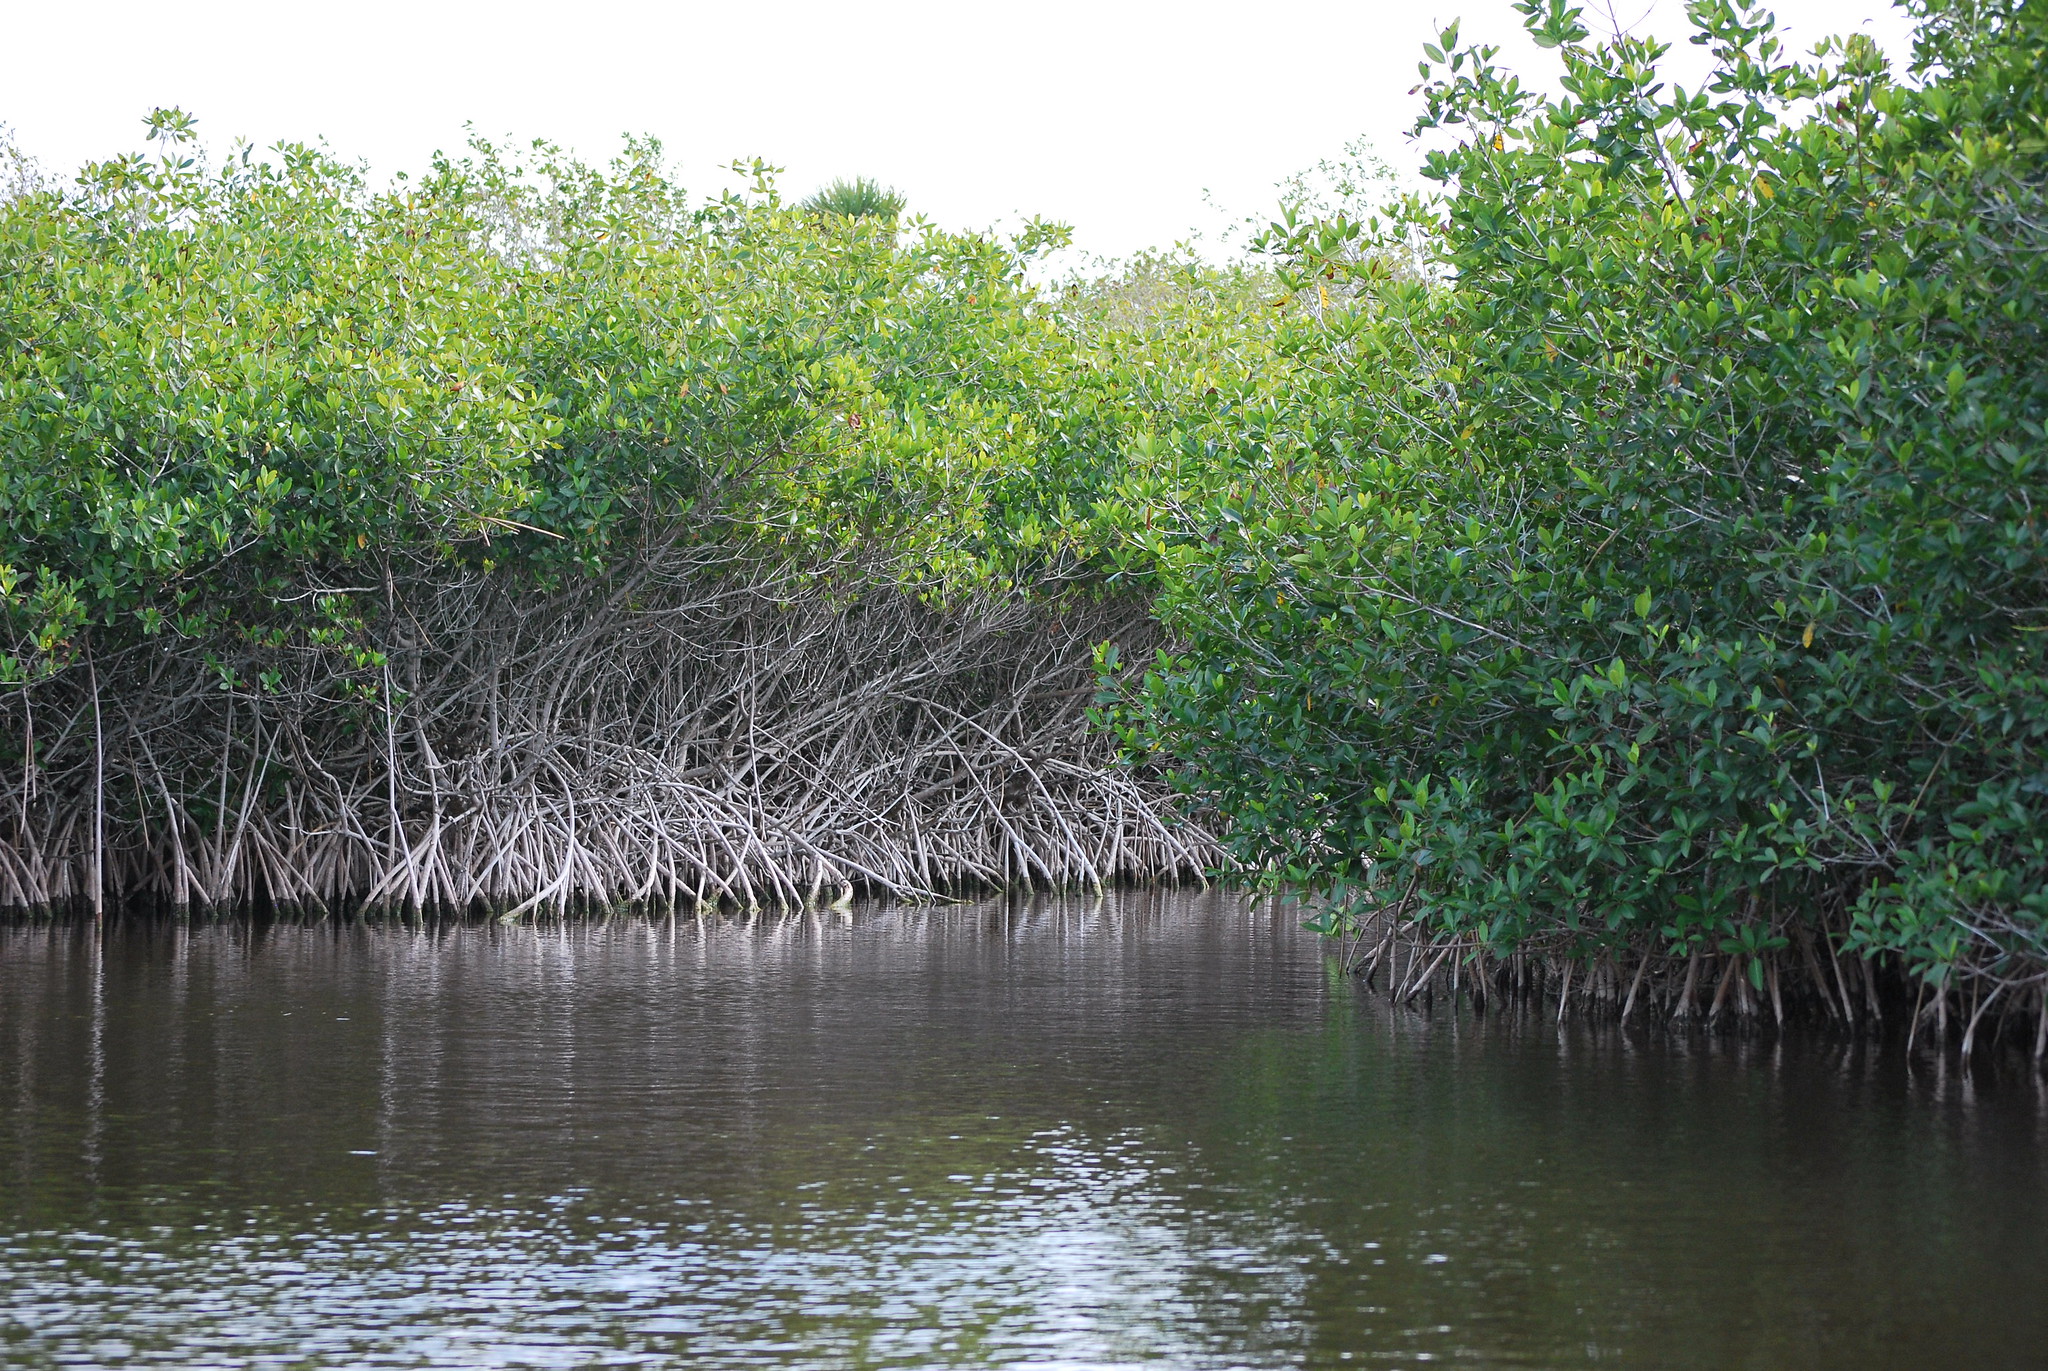 A mangrove forest in the Everglades.